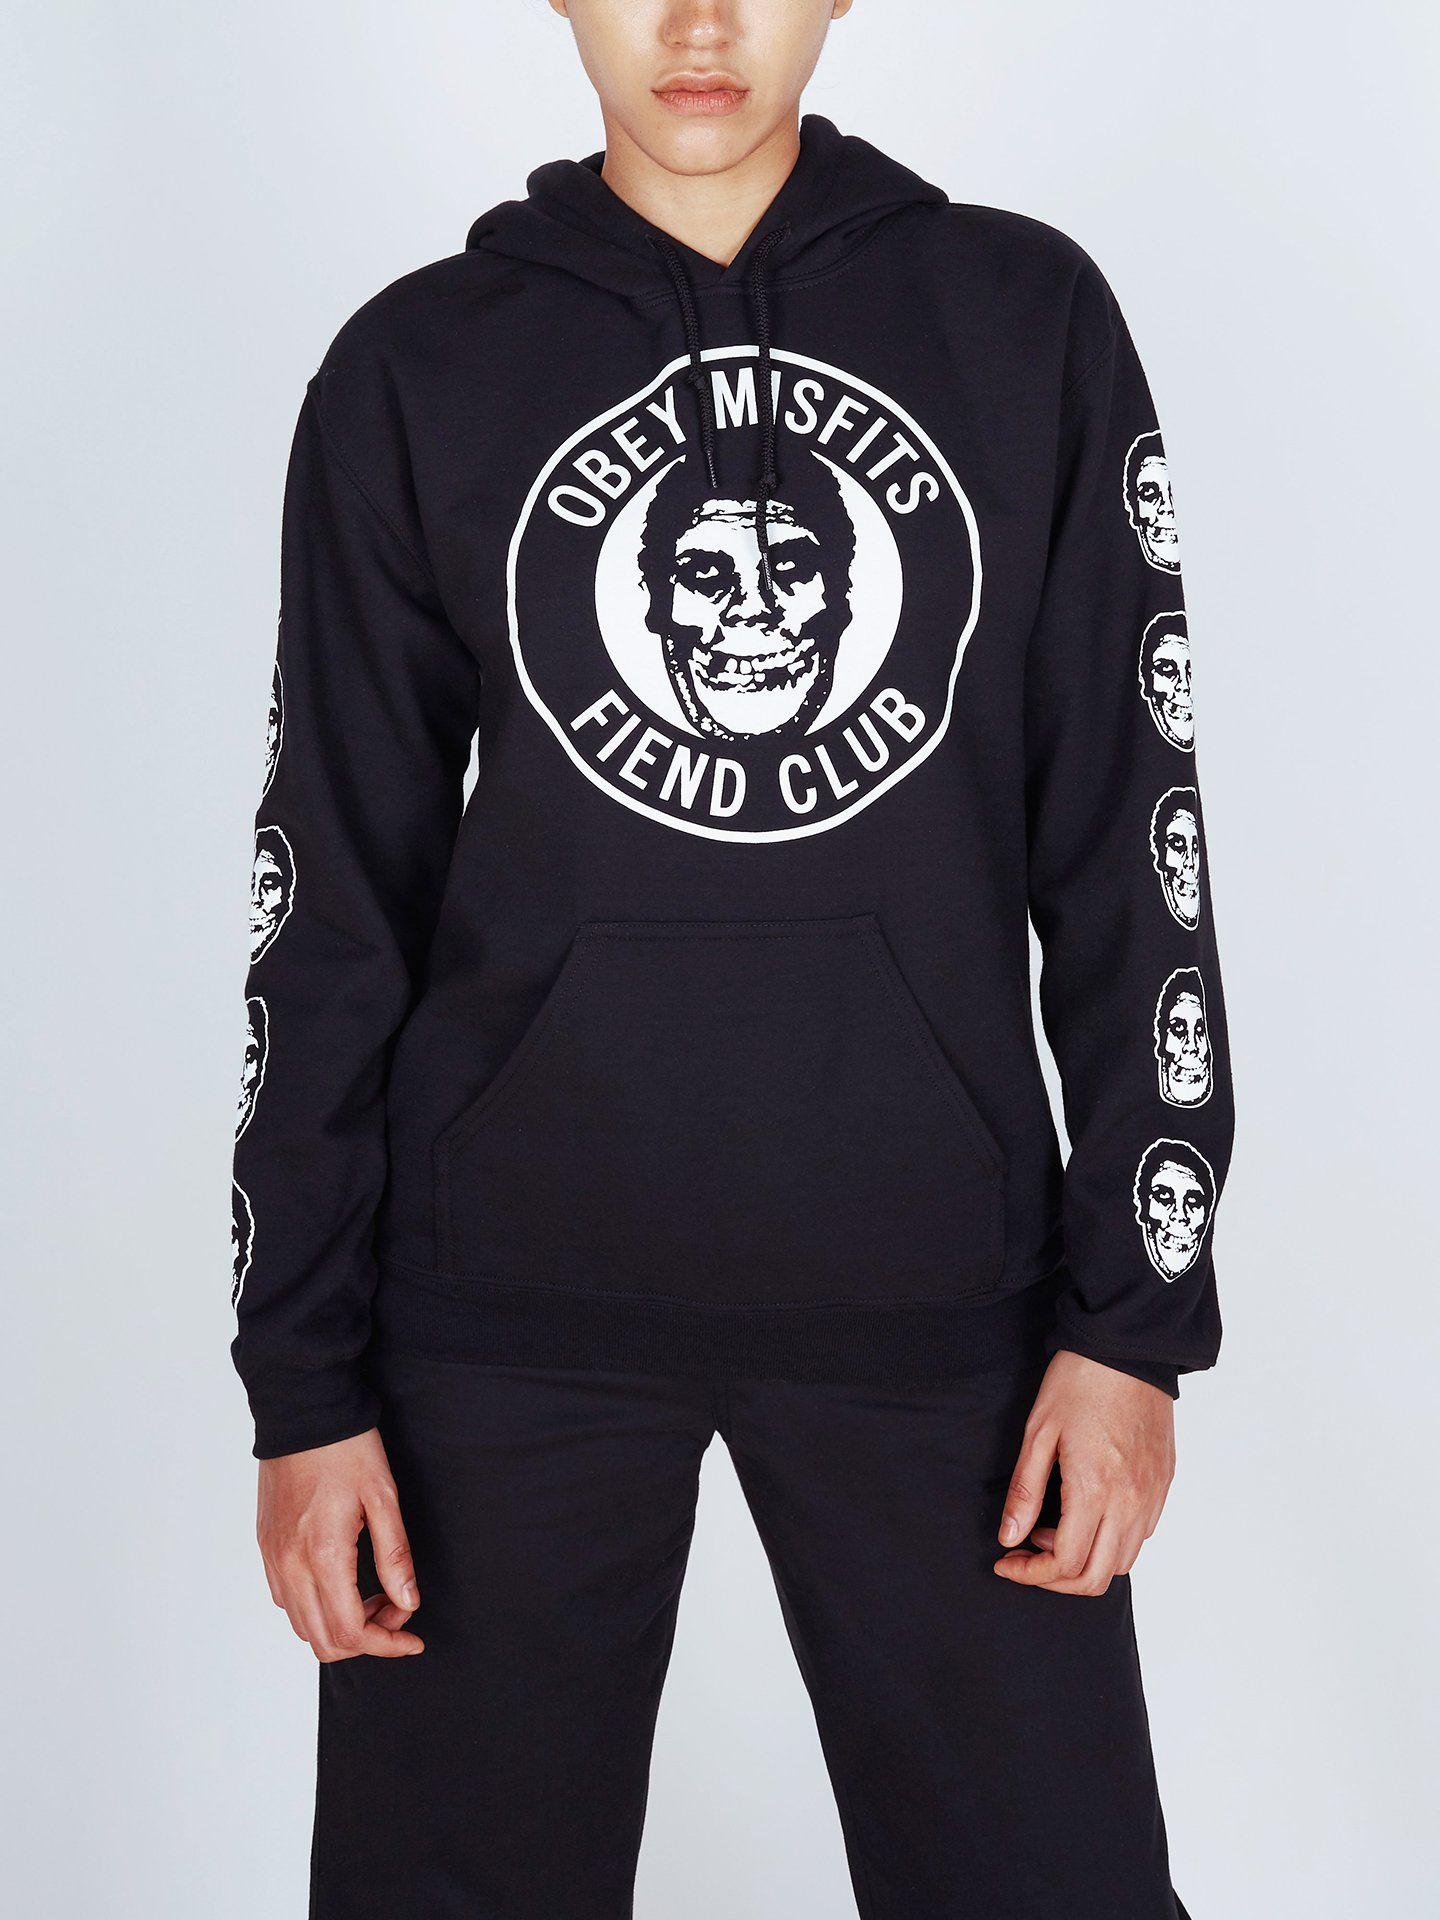 OBEY Clothing Old Logo - OBEY / Obey Misfits Creeper Fiend Club Old School Pullover Hood